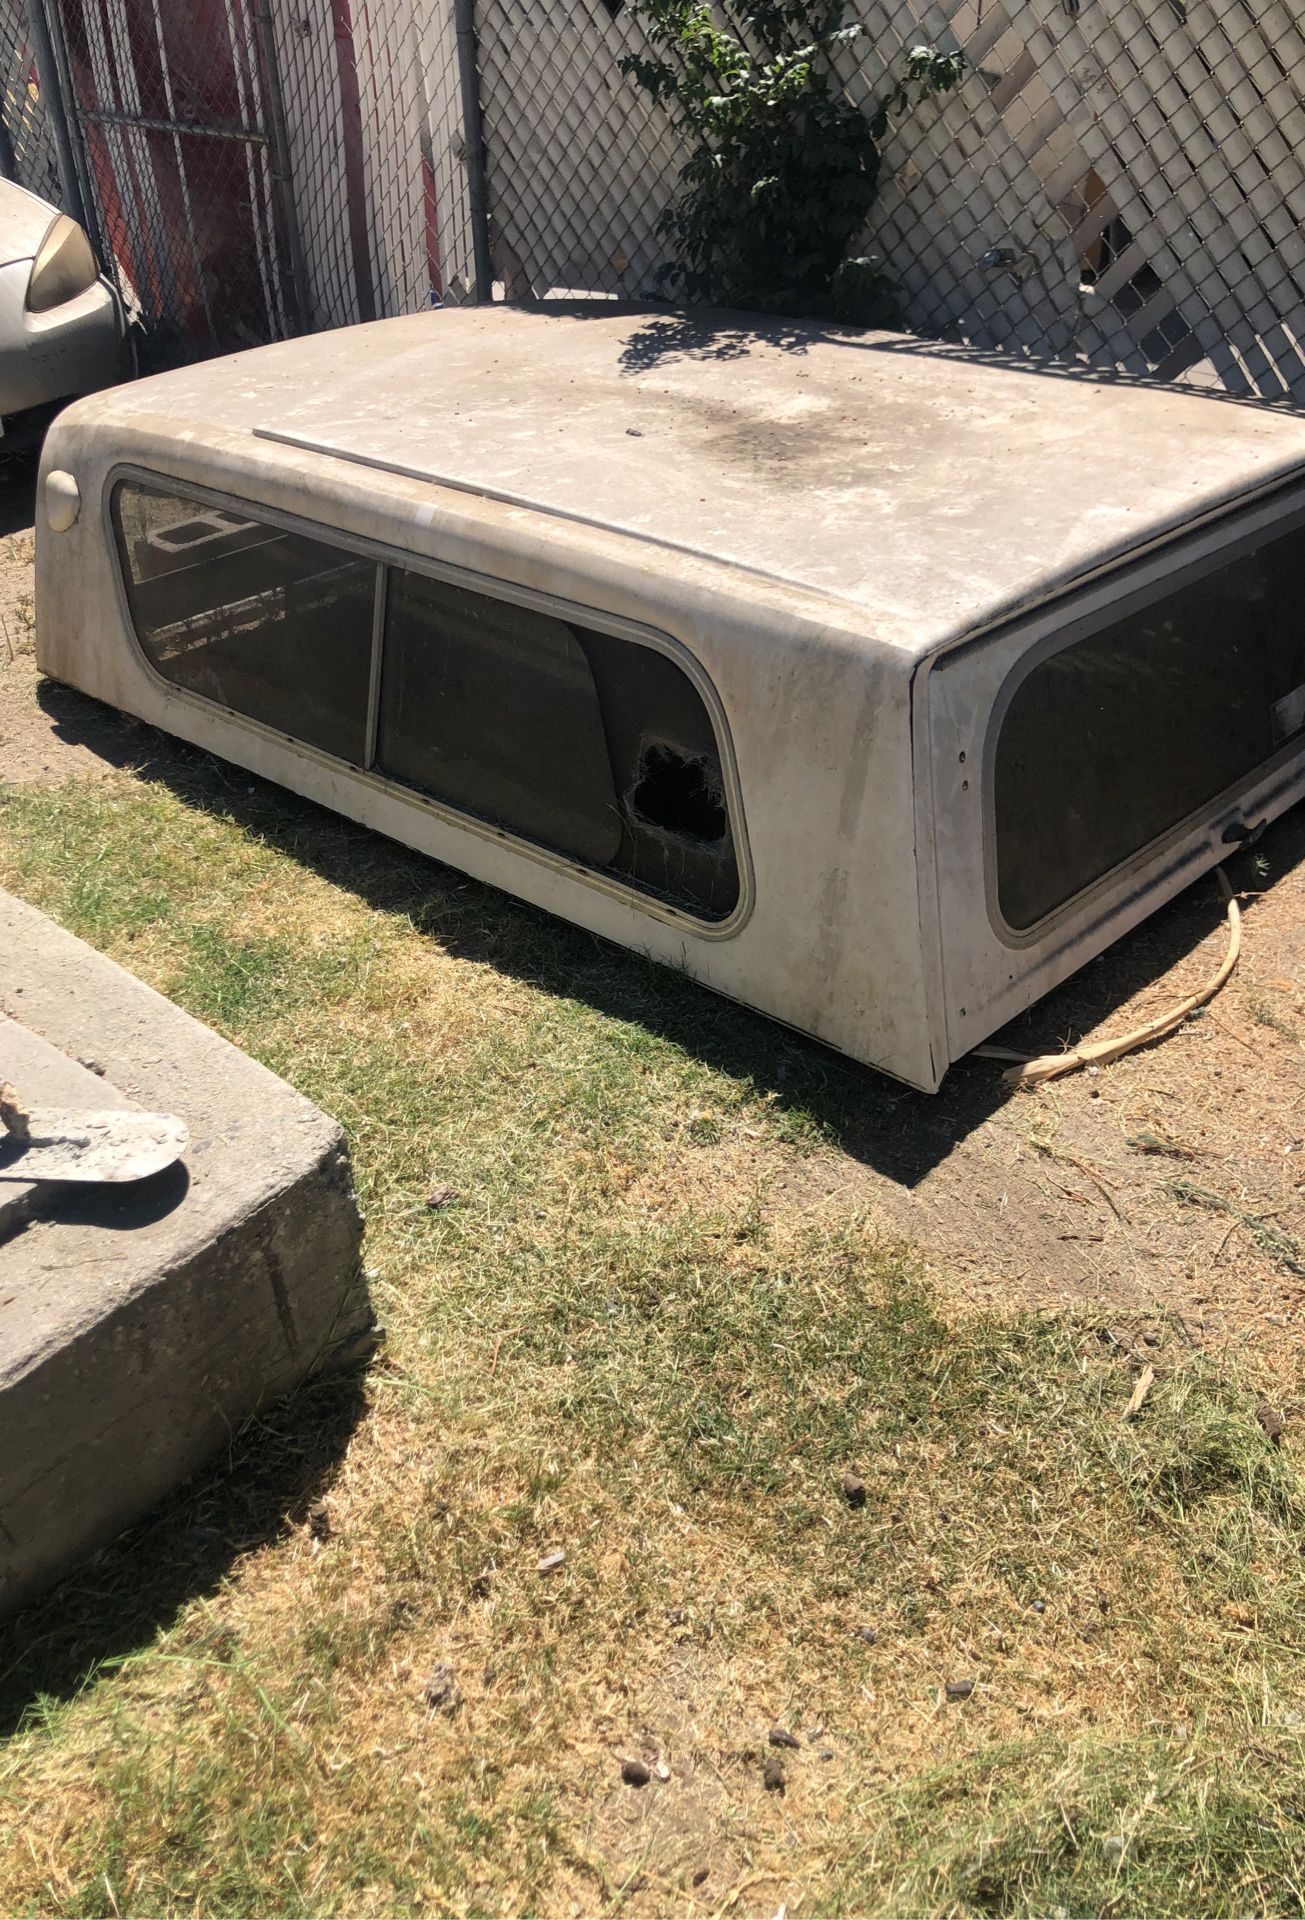 Free camper shell